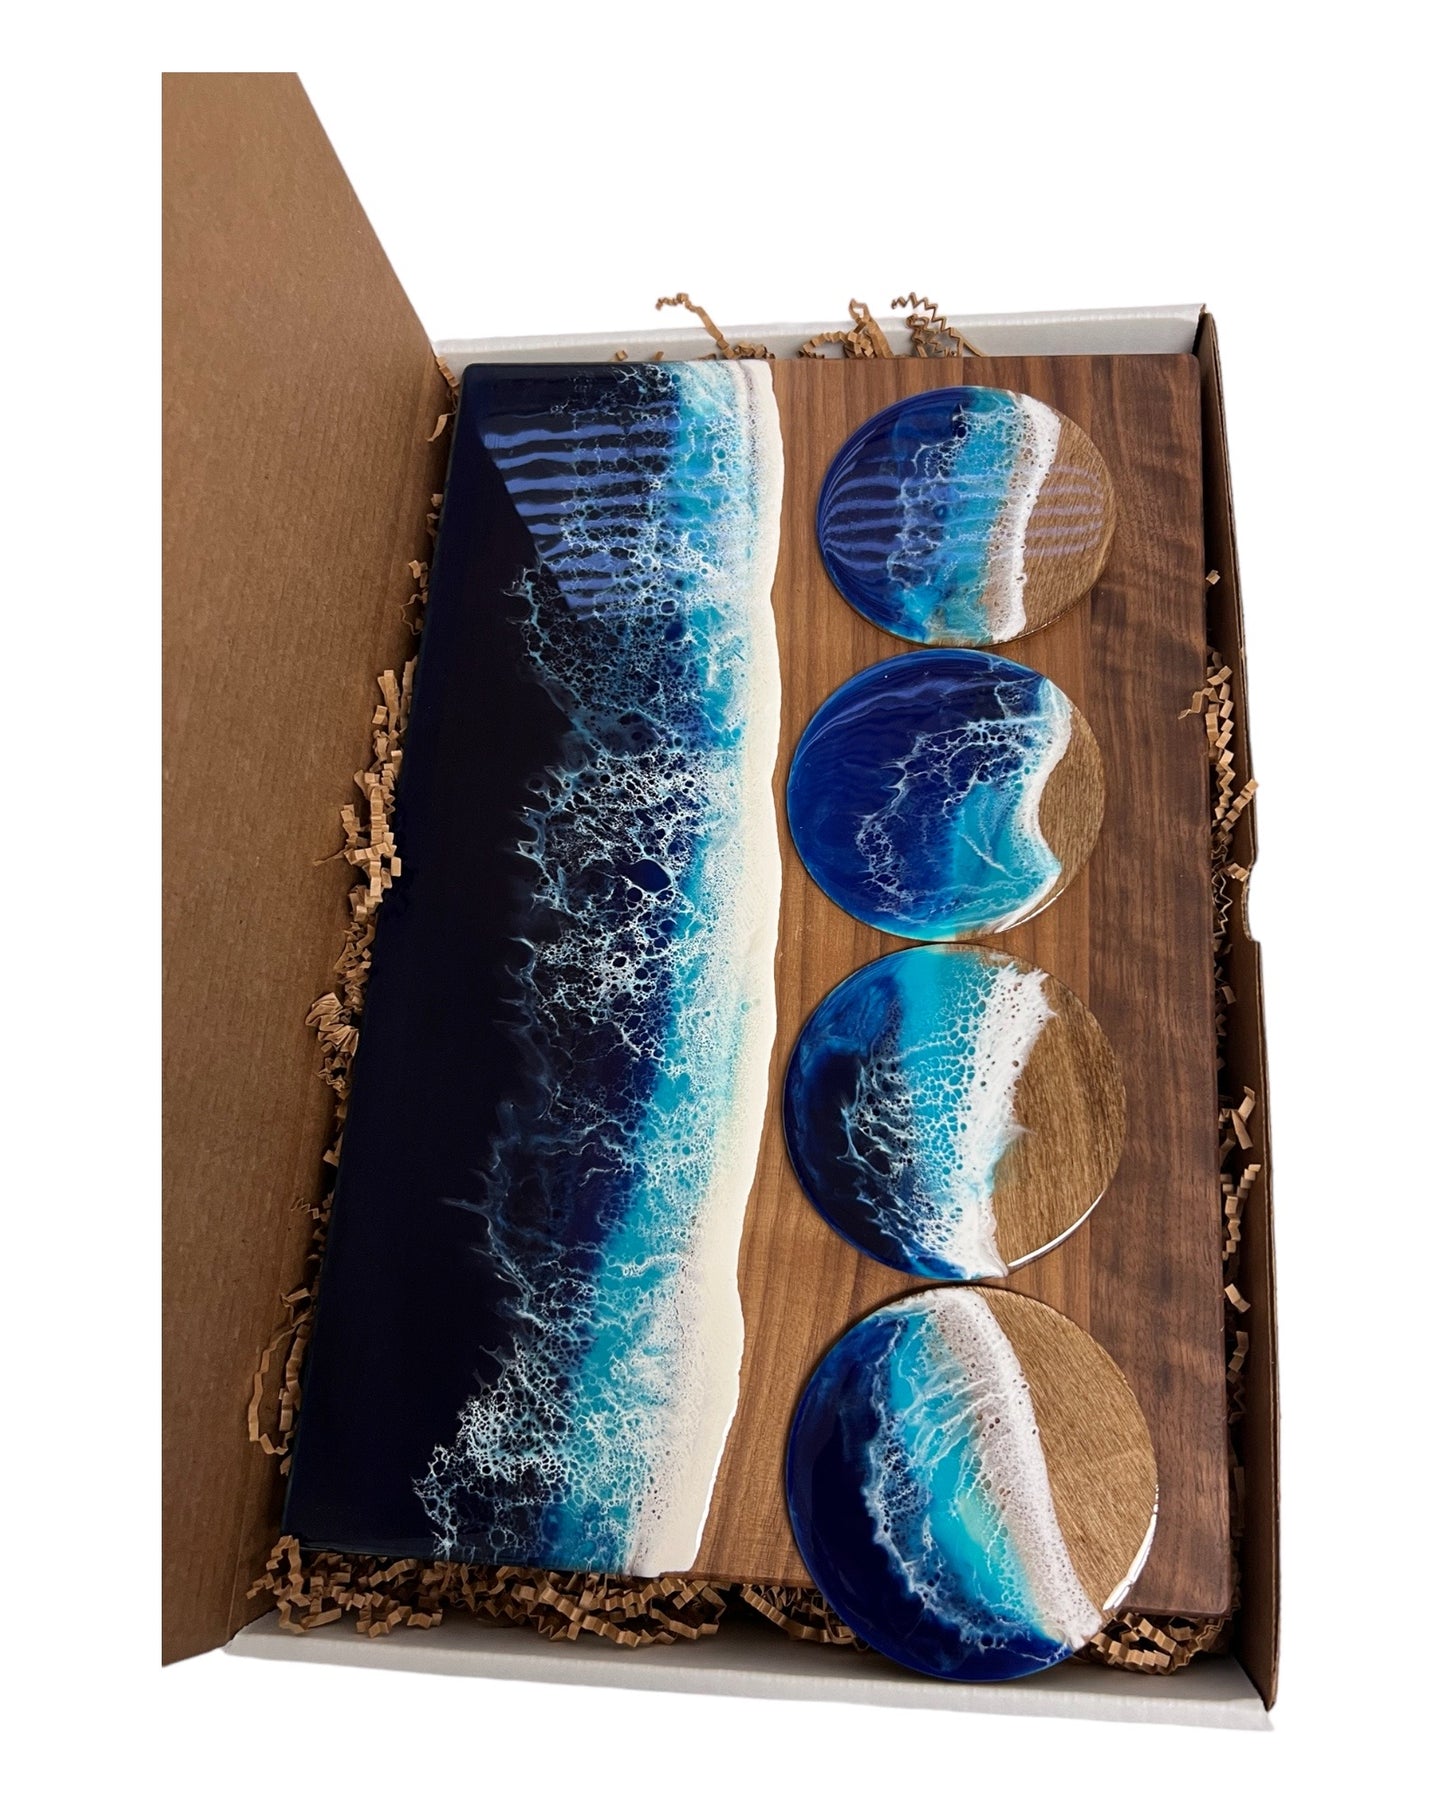 Nautical Cheese Board Whale Tail walnut Cutting Board Charcuterie Board with Personalization and Gift Box with Coaster Set